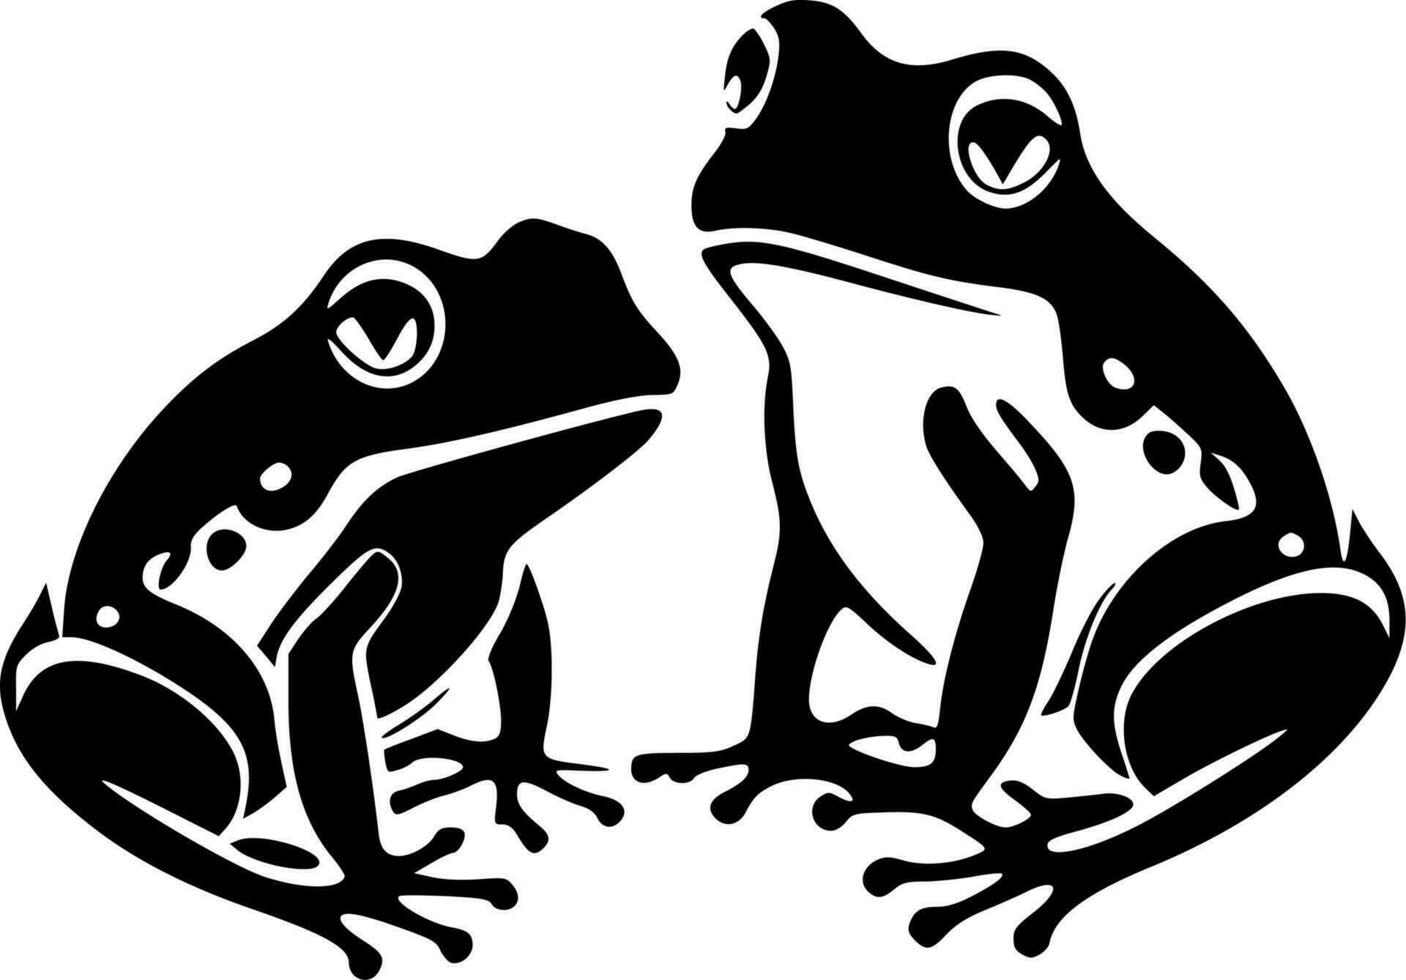 Frogs - High Quality Vector Logo - Vector illustration ideal for T-shirt graphic